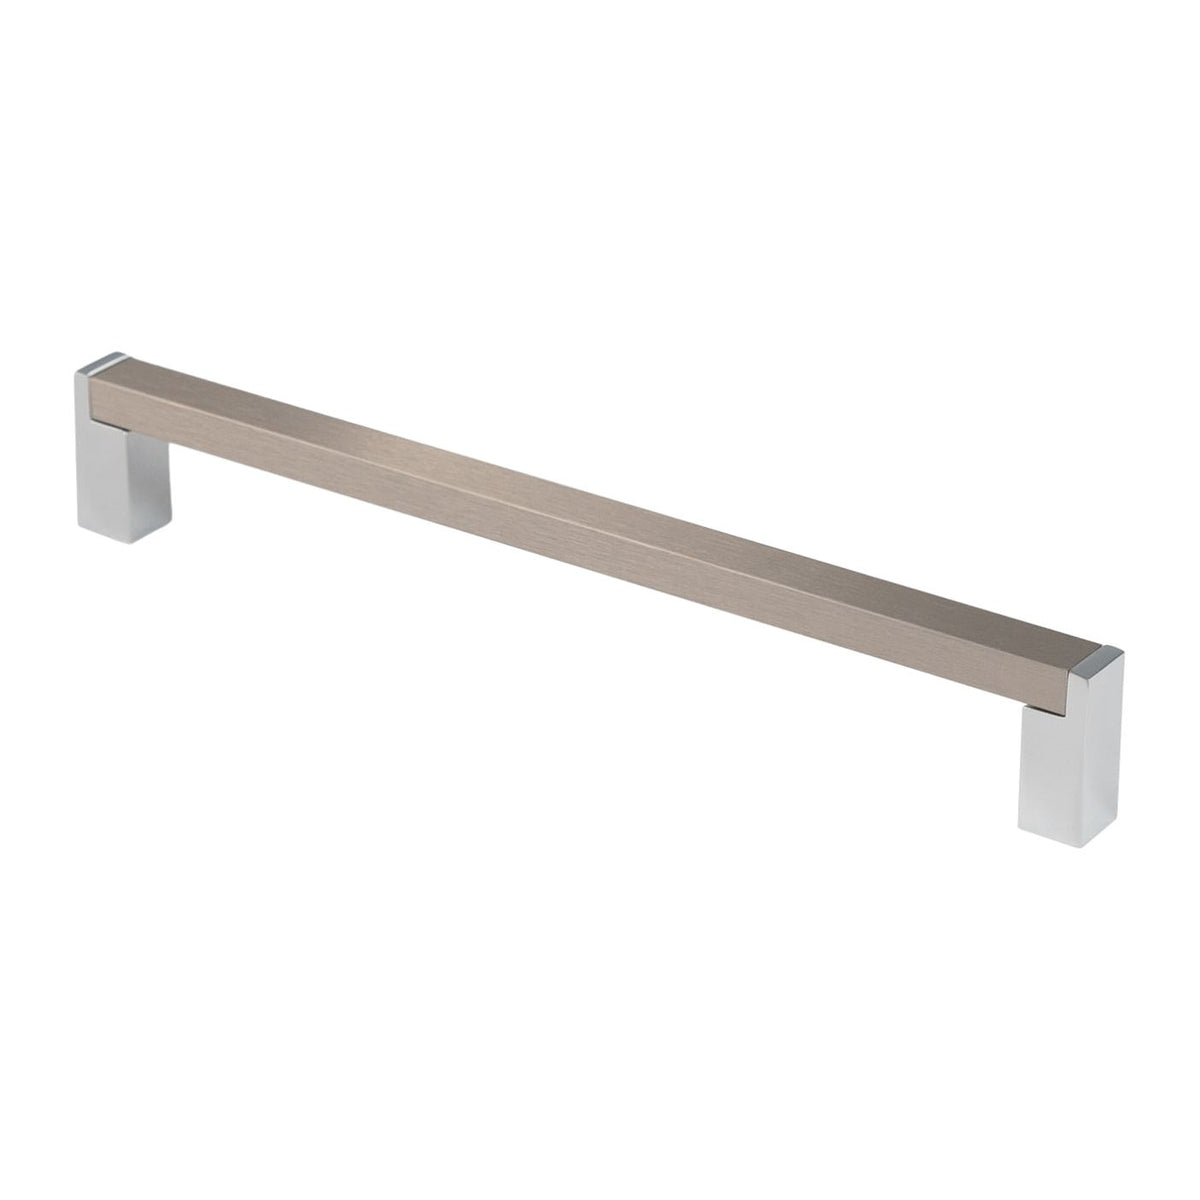 Rocheleau - POI-R2004-192-PC-BSN - Shopify - 3.41 - Chrome and Brushed Nickel